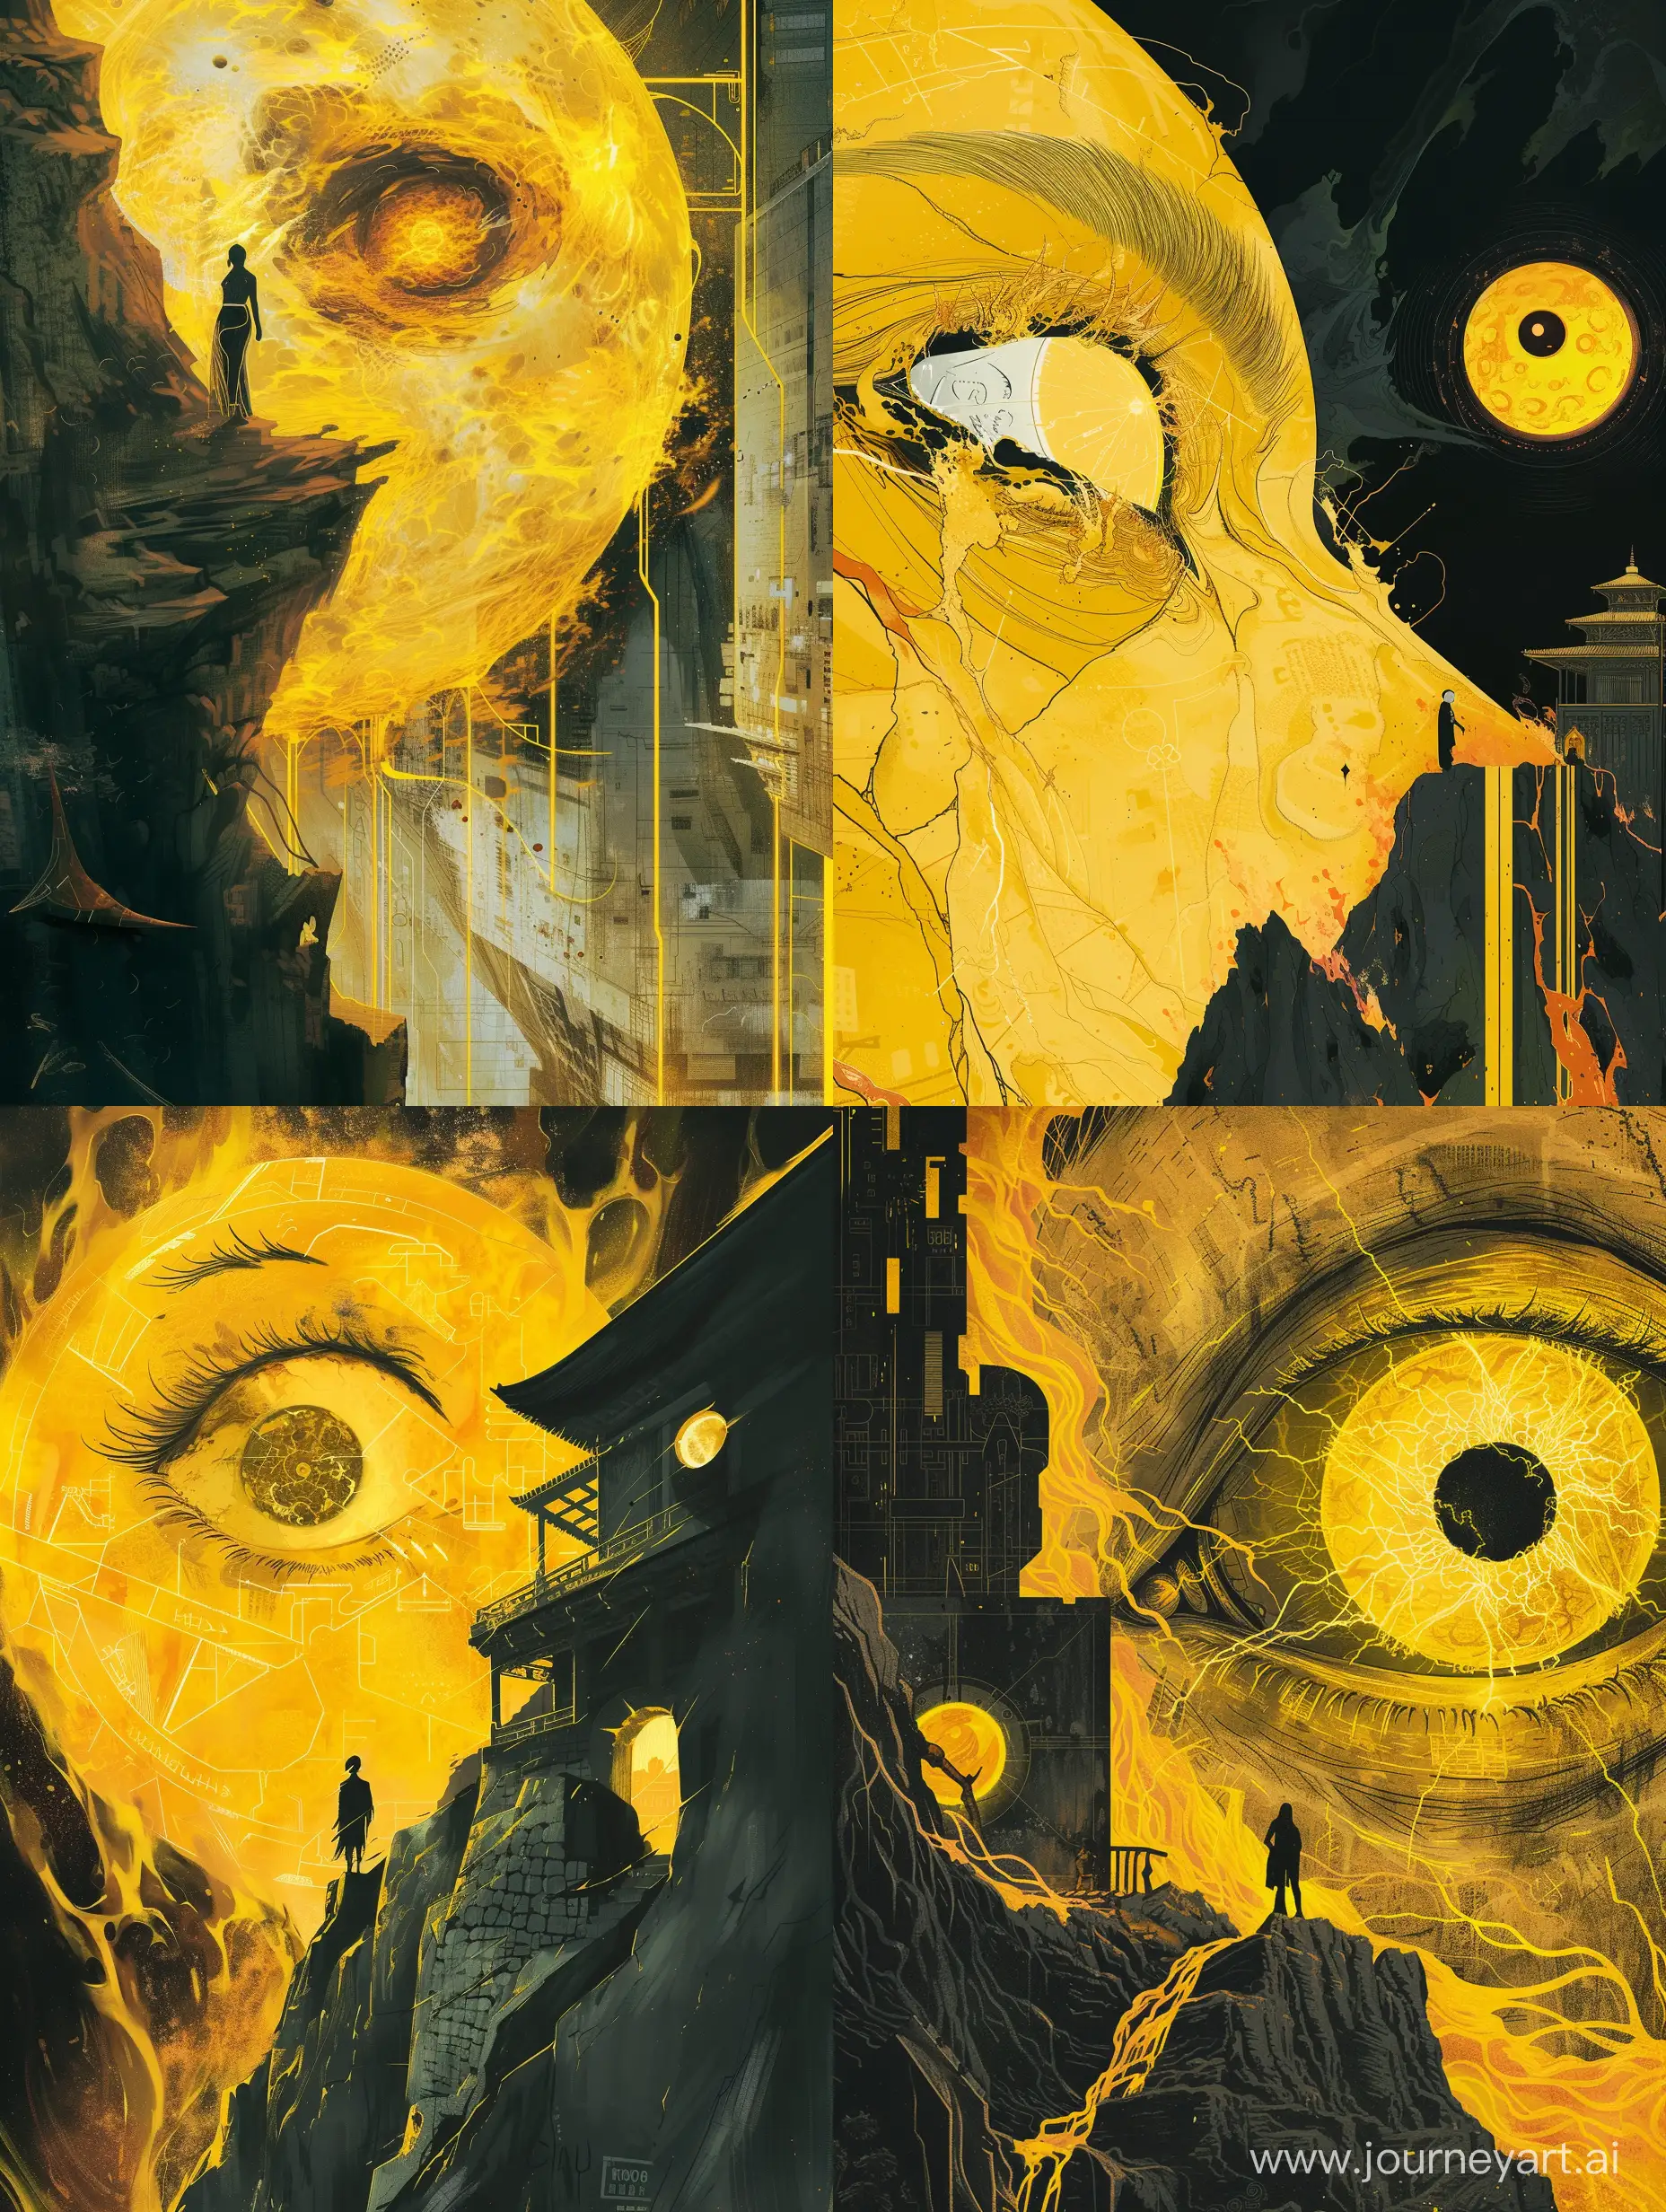 "An image of goddess Hekate, donning vibrant yellow and black athleisure attire, standing against a backdrop of an abstract representation of desirous hunger, where the fire within is visually conveyed through fiery elements. In the foreground, a tiny dark silhouette of a man peers out from a cliff, as the moon looms large, resembling a yellow giant human eye with a detailed pupil. The scene is imbued with elements of cyberpunk and anime, featuring a building in a cyberspace setting, with negative space and virtual world elements. The overall aesthetic incorporates elements of noir dark manga, such as yellow neons, line art, gritty and harsh lines, and is influenced by artists like Mike Ploog, Rumiko Takahashi, and Ilya Kuvshinov, resulting in a captivating, transcending visual that fuses mythology, cyberpunk, and anime influences" s 1000